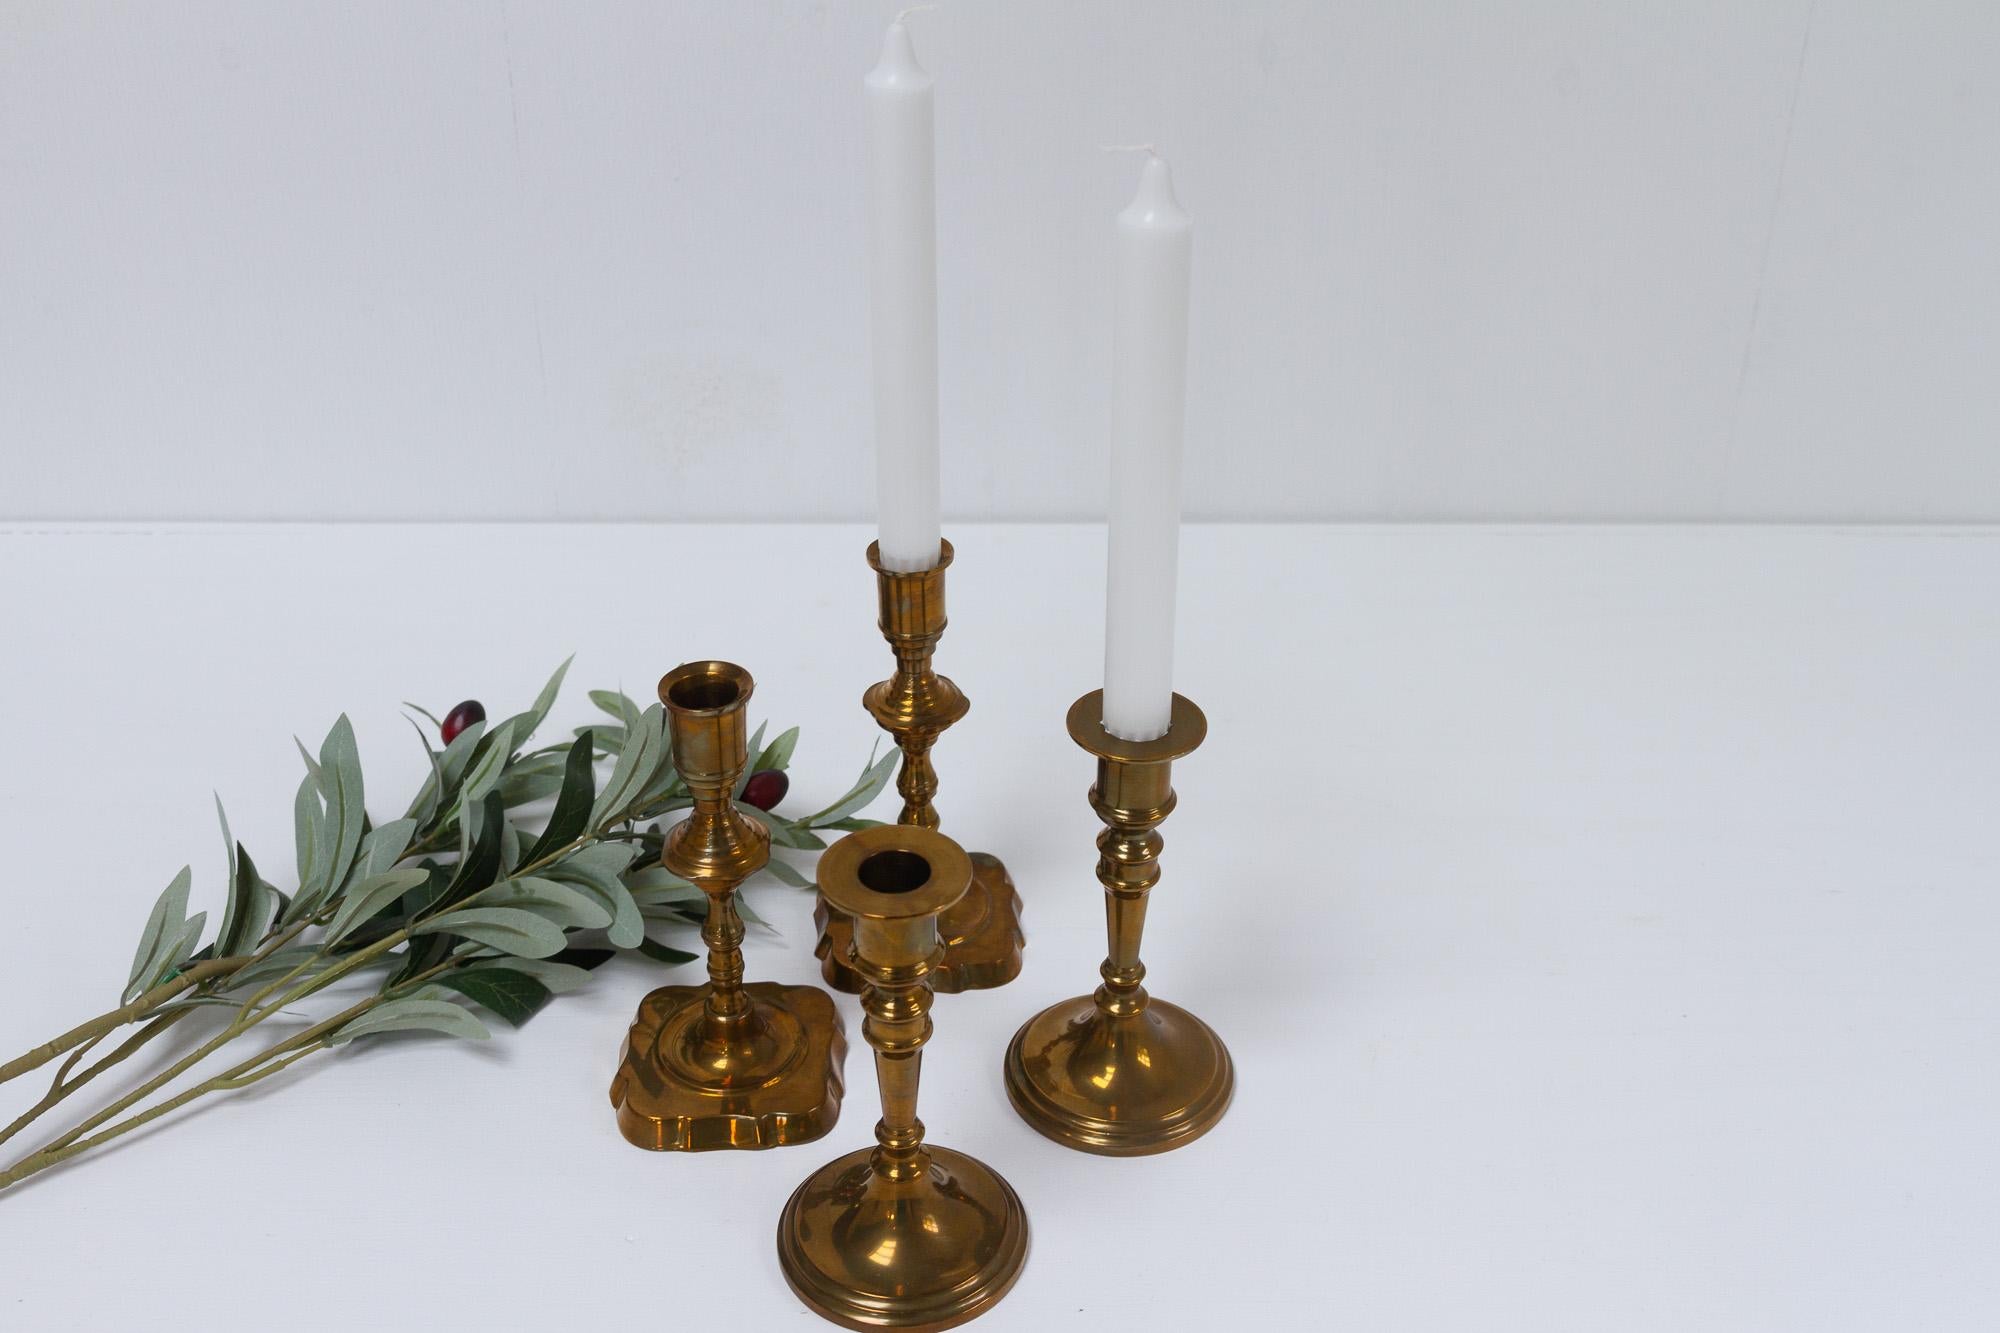 Vintage Danish Malm Candle Holders, 1950s. Set of 4. For Sale 1